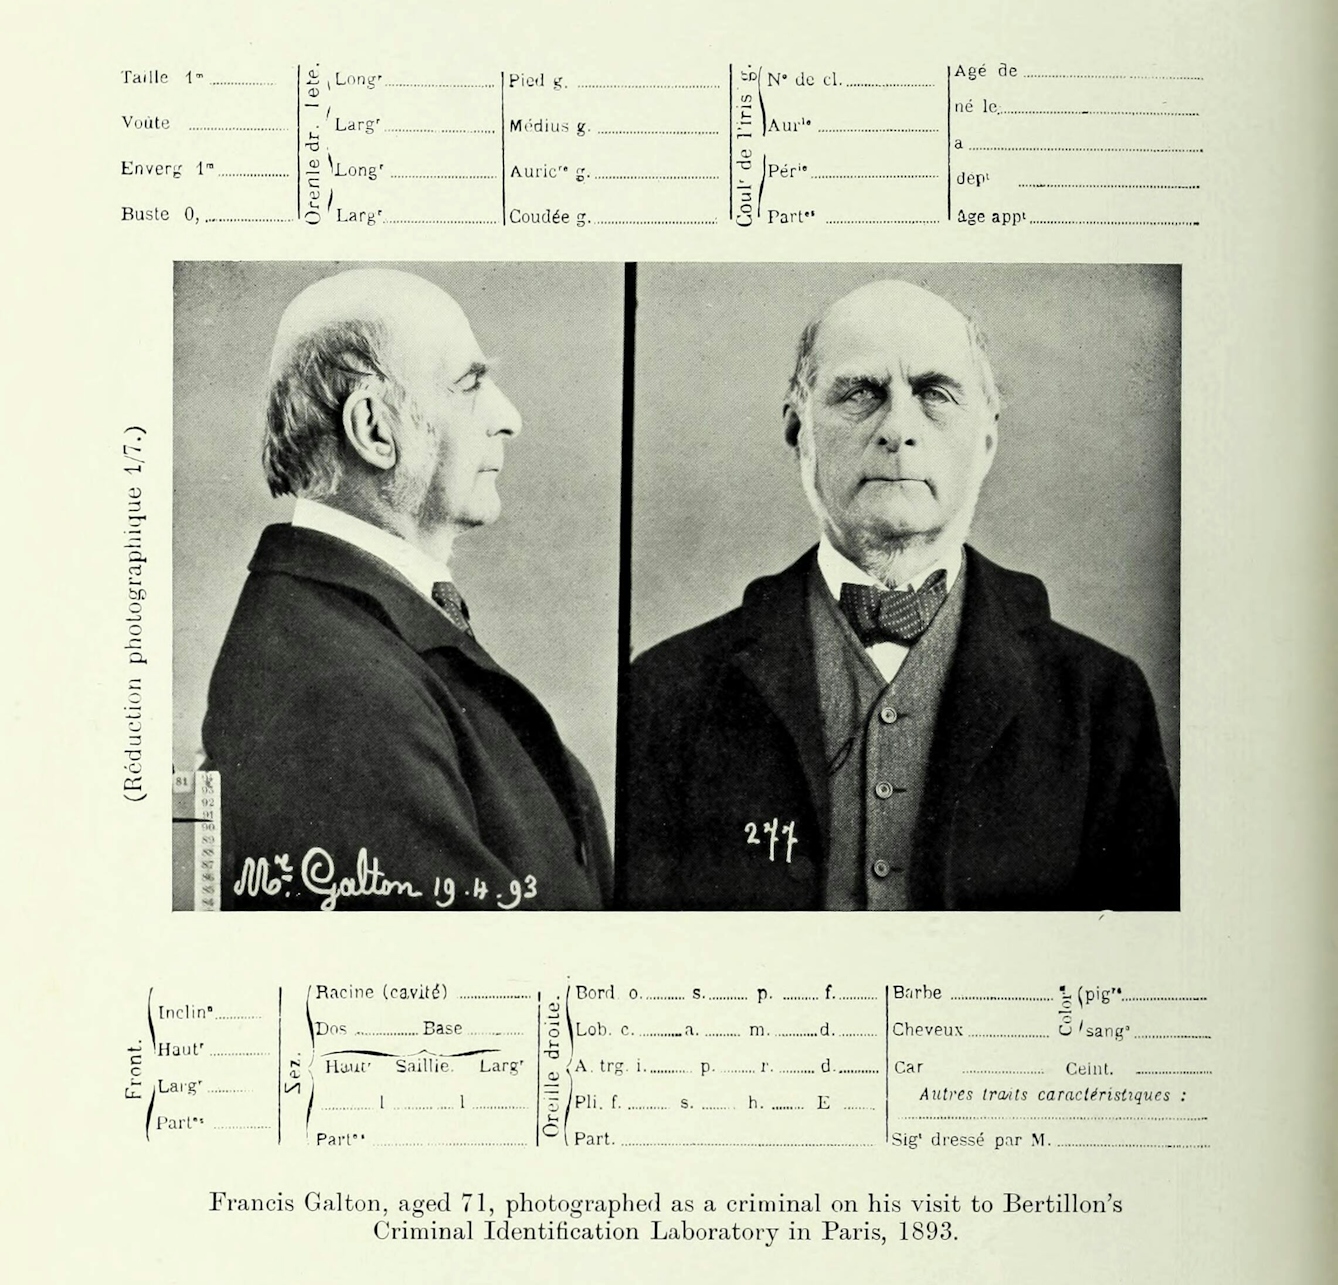 Frances Galton, aged 71, photographed face-on and in profile as a criminal on his visit to Bertillon’s Criminal Identification Laboratory. Above and below the black and white photographs of a balding man in formal Victorian clothes is text in French with spacing for adding anthropomorphic and personal details about him.